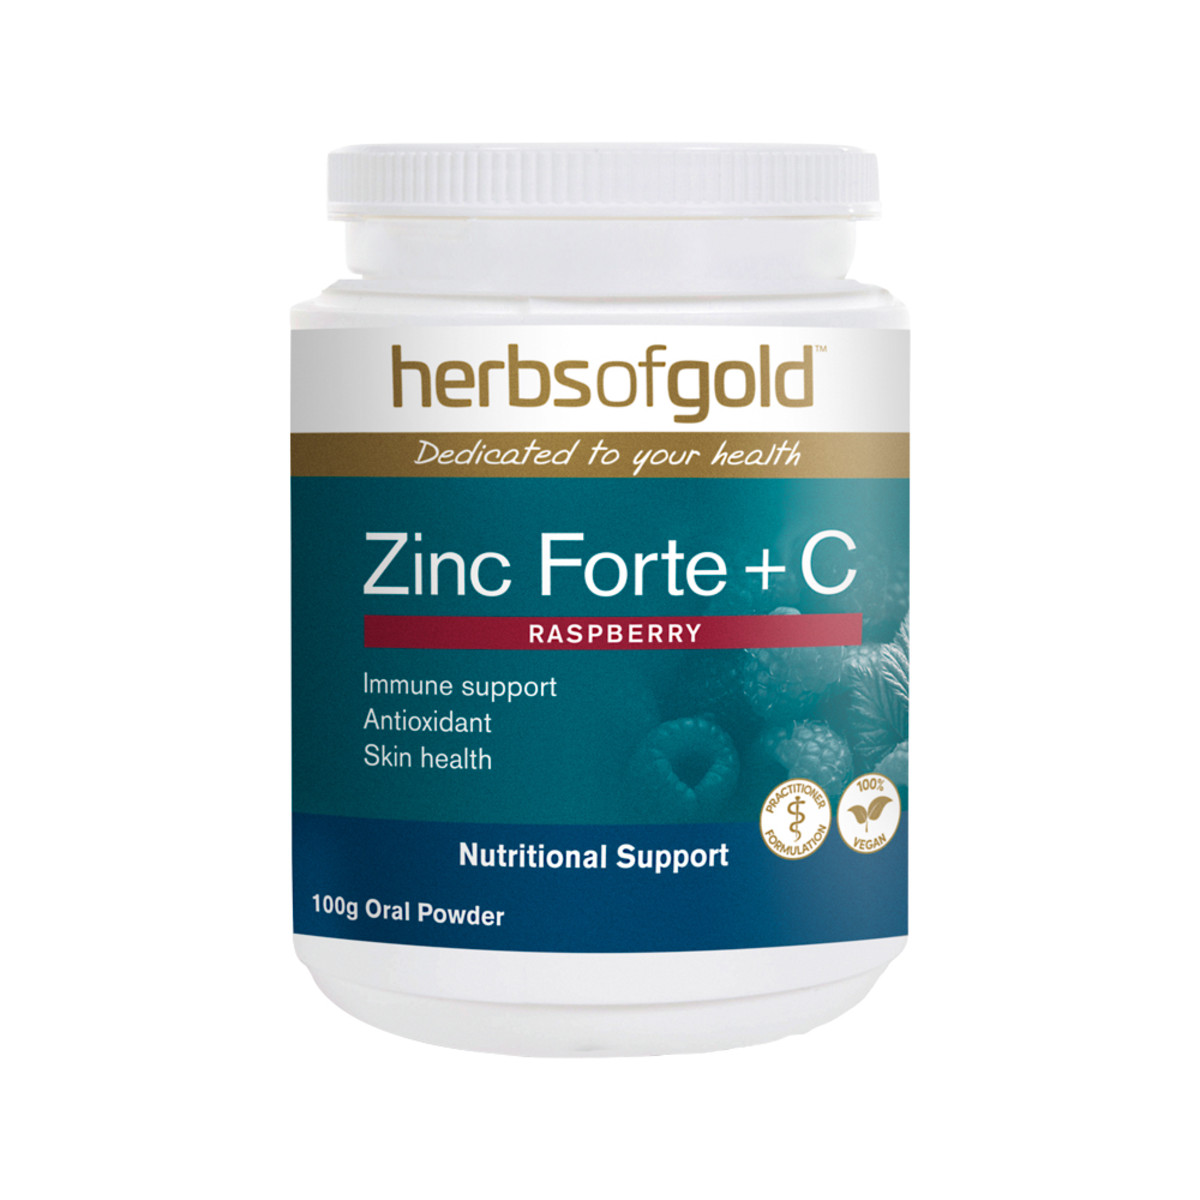 HERBS OF GOLD - Zinc Forte + C (Raspberry Flavour)